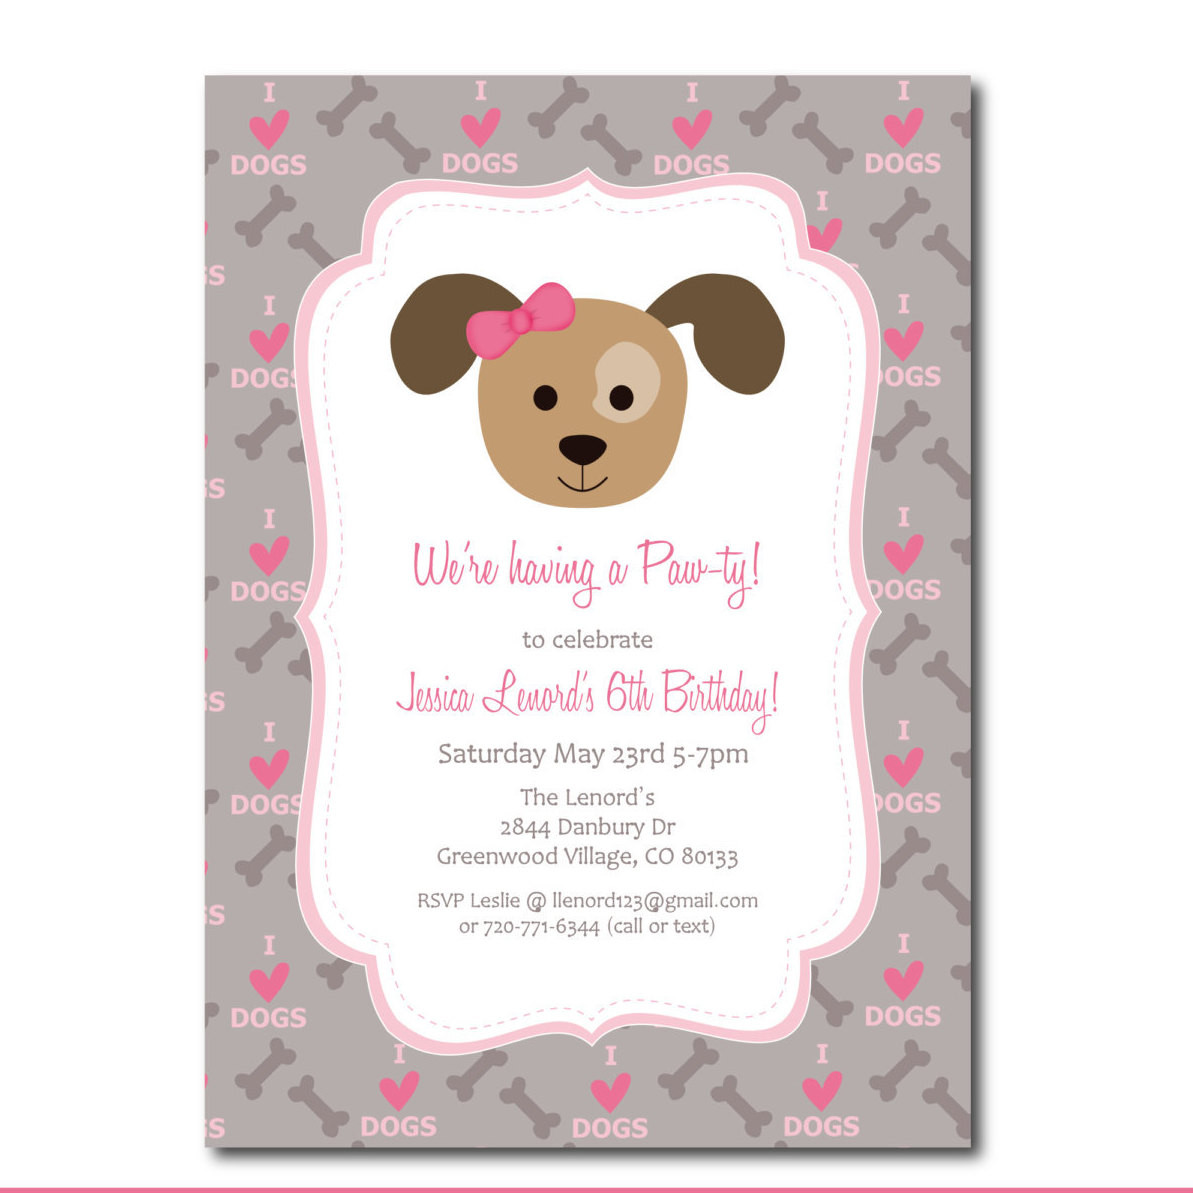 Puppy Birthday Invitations
 Puppy Party Invitation with Editable Text Dog Party